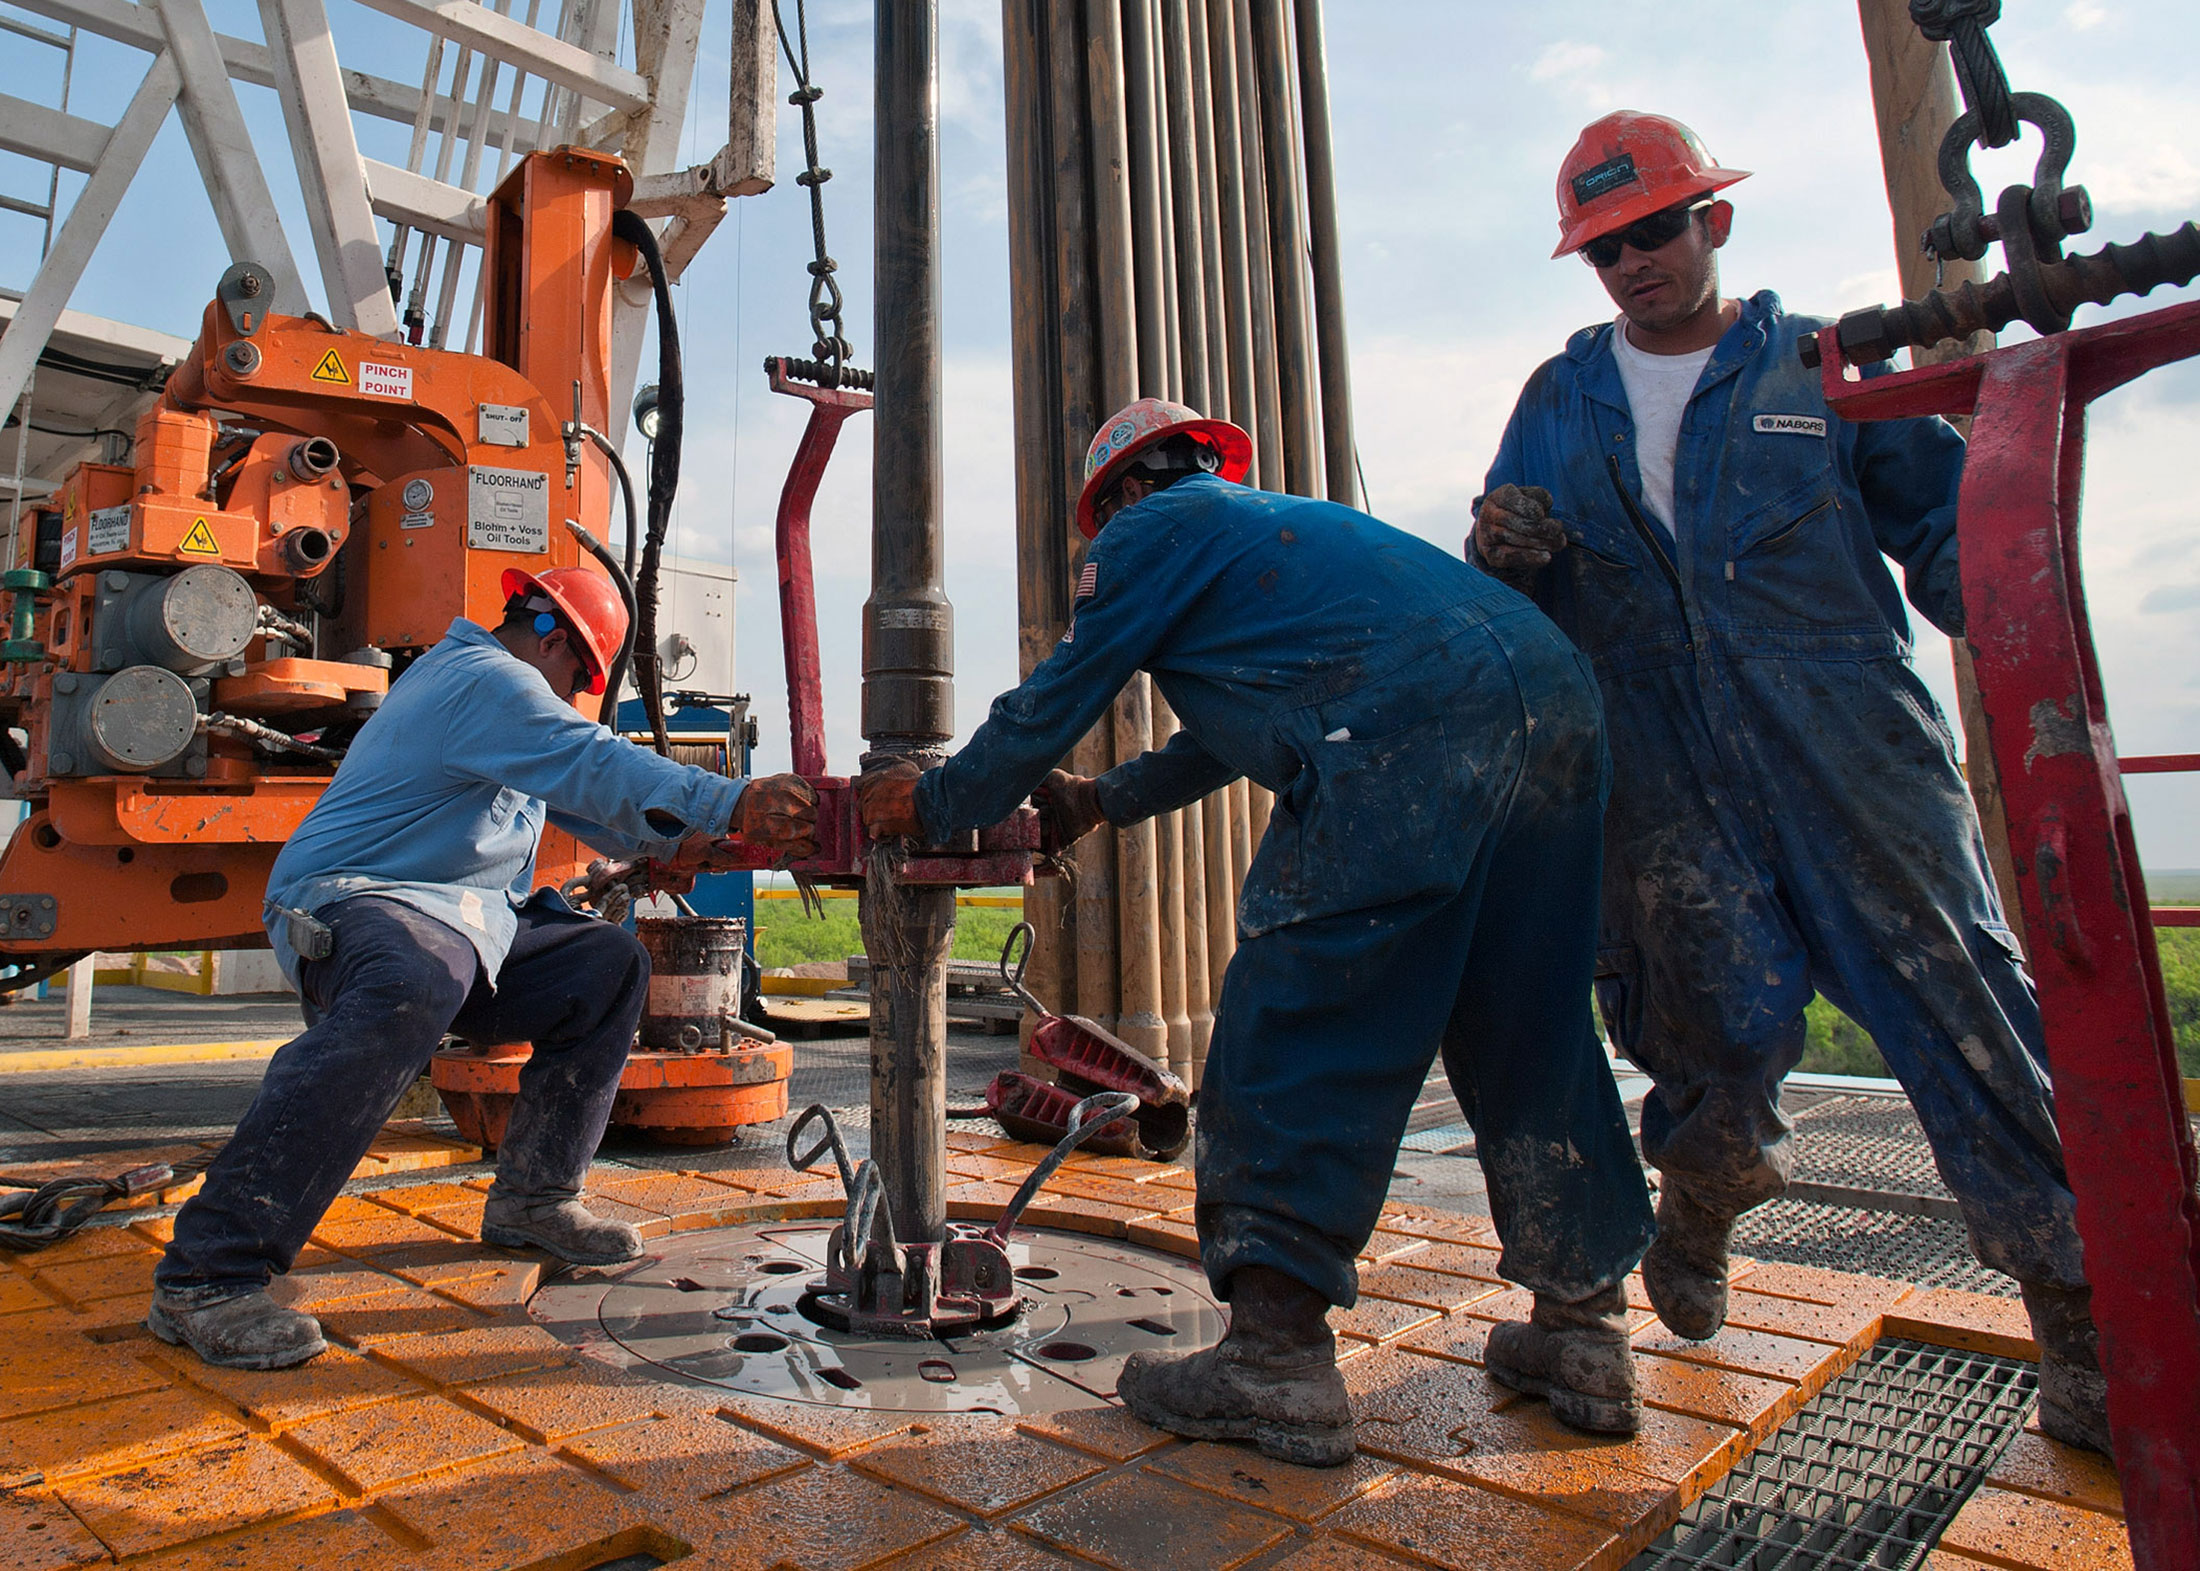 Wall Street Lenders Growing Impatient With U.S. Shale Revolution - Bloomberg